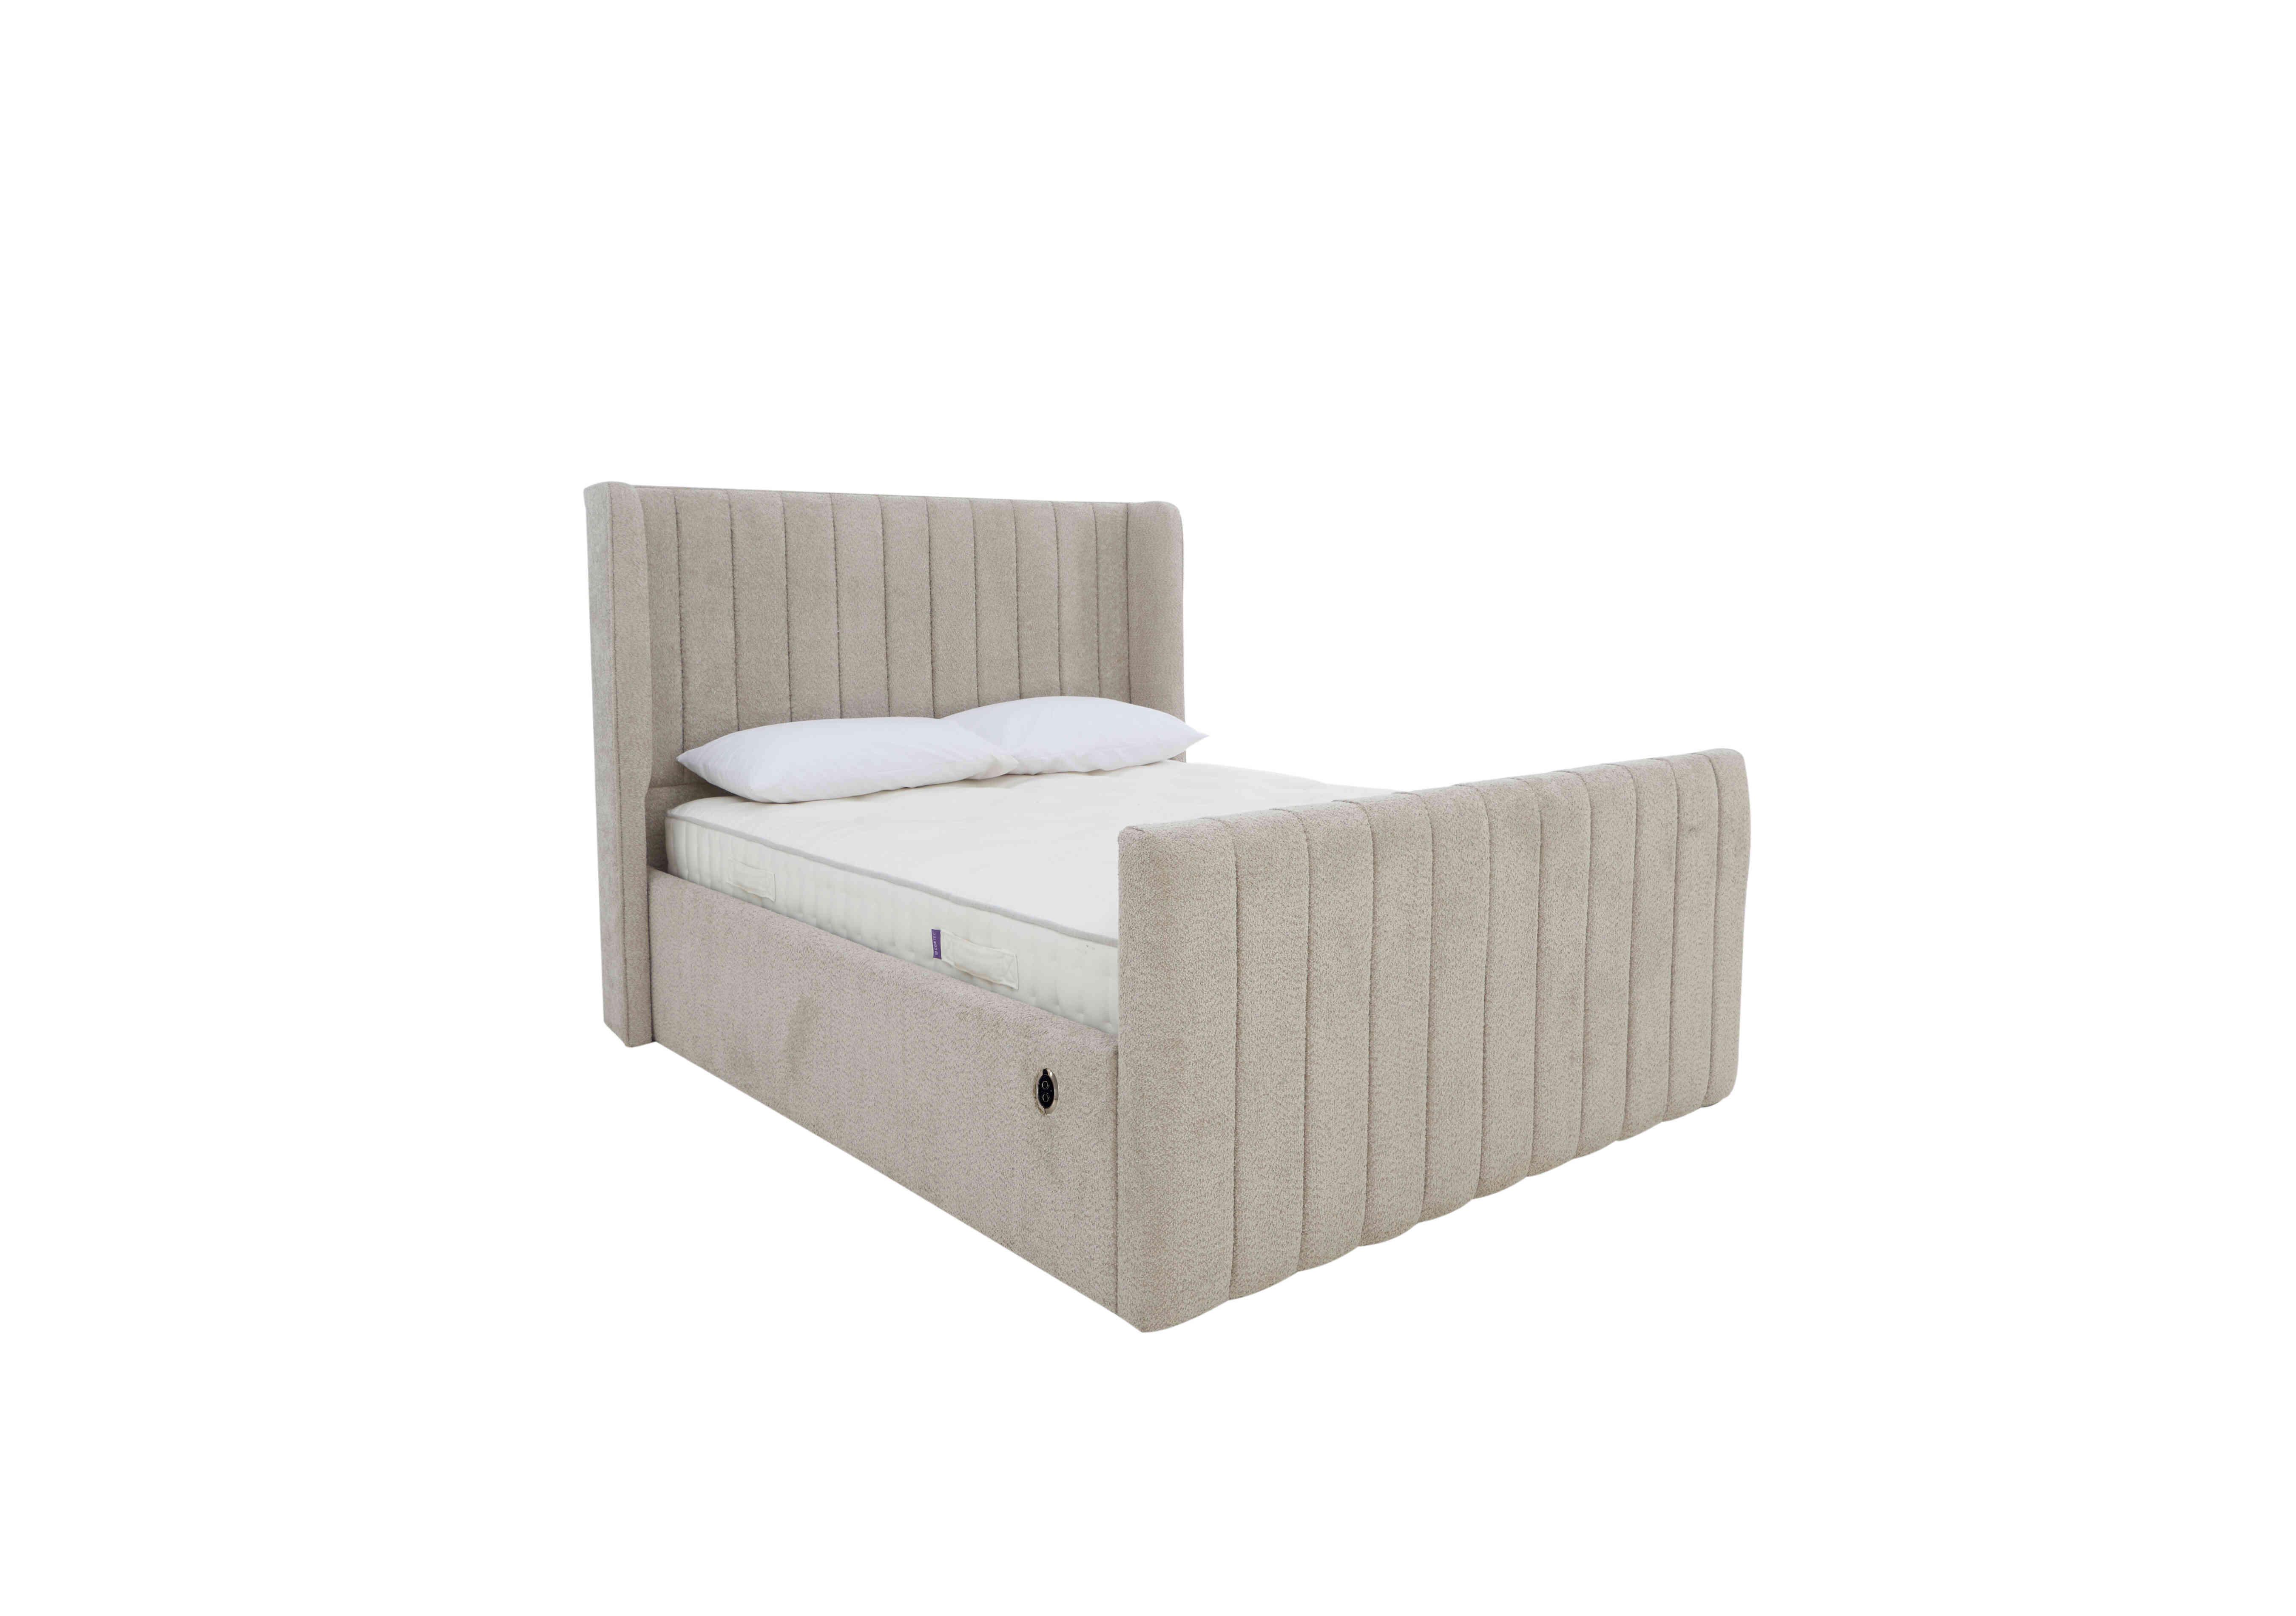 Eira High Foot End Electric Ottoman Bed Frame in Comfy Mink on Furniture Village